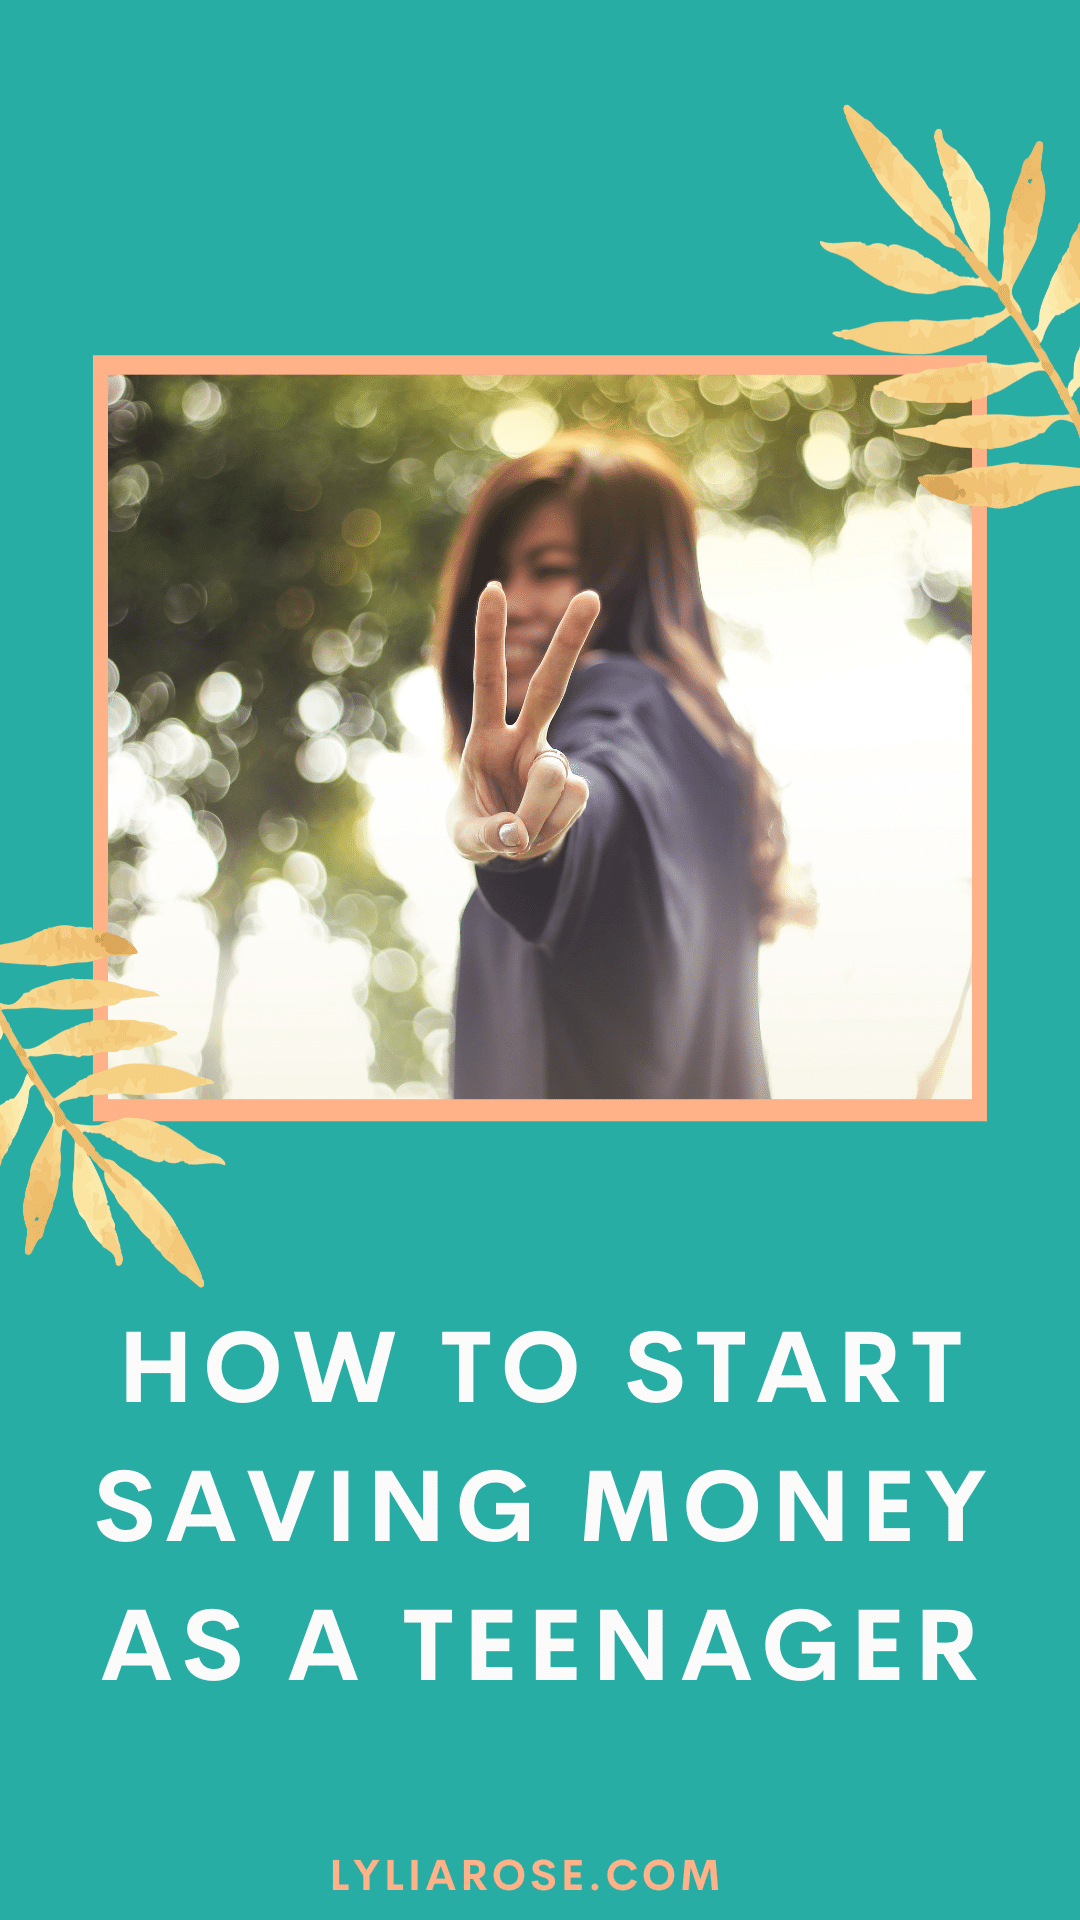 How to start saving money as a teenager